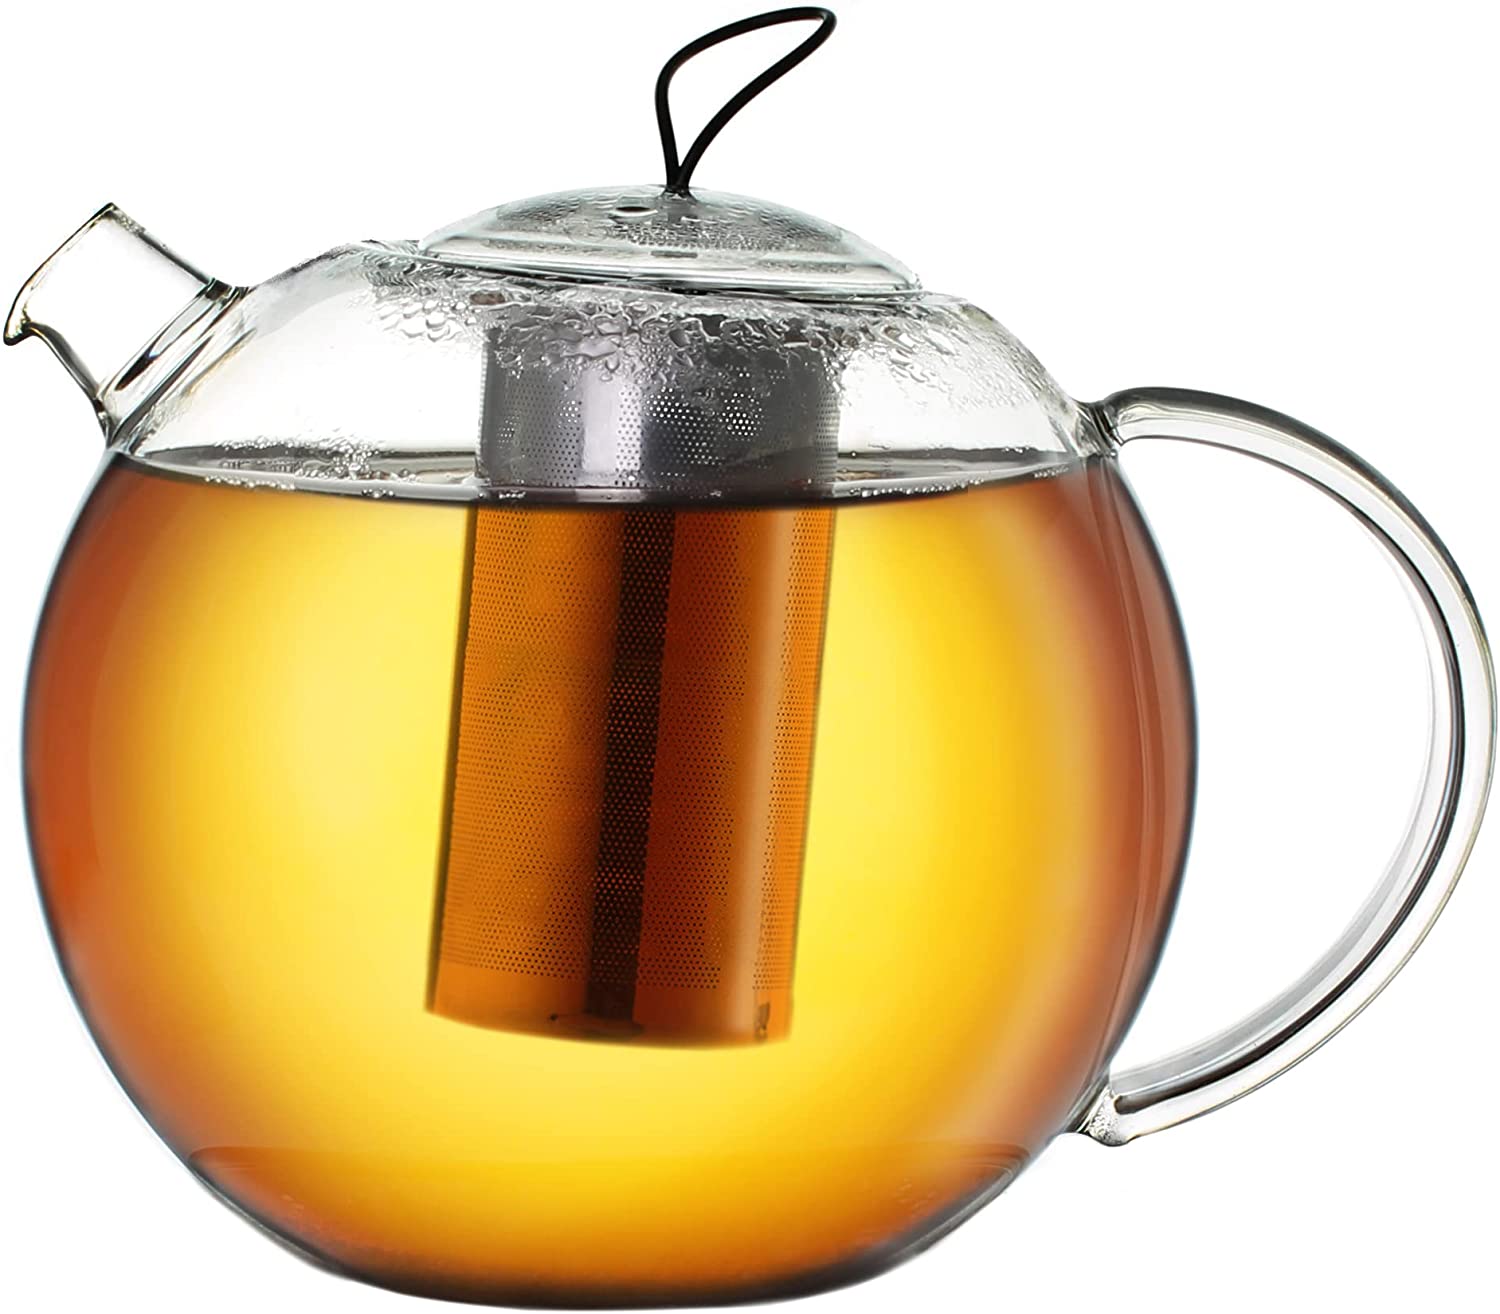 Creano Teapot 1.5 L Jumbo, 3-Piece Glass Teapot Set with Integrated Stainless Steel Strainer & Glass Lid, Multifunctional Design Glass Teapot